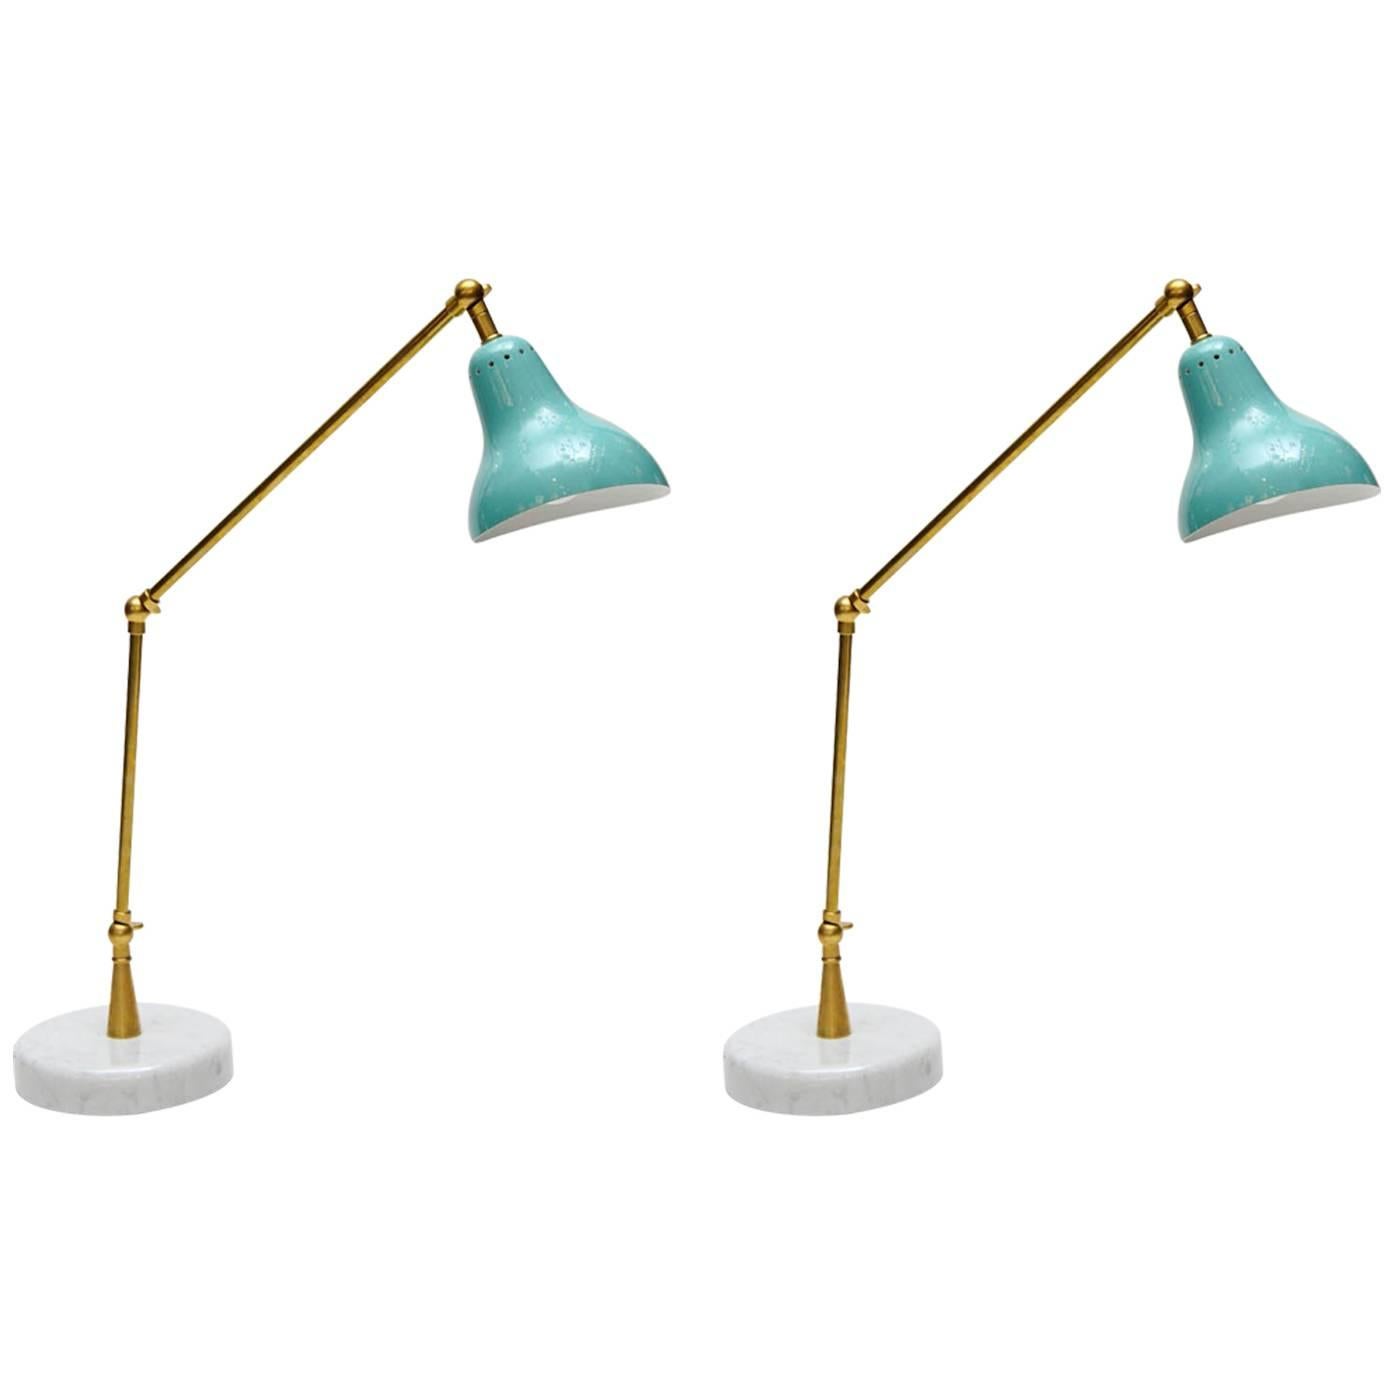 Italian Teal Cone Articulated Arm Desk Lamps